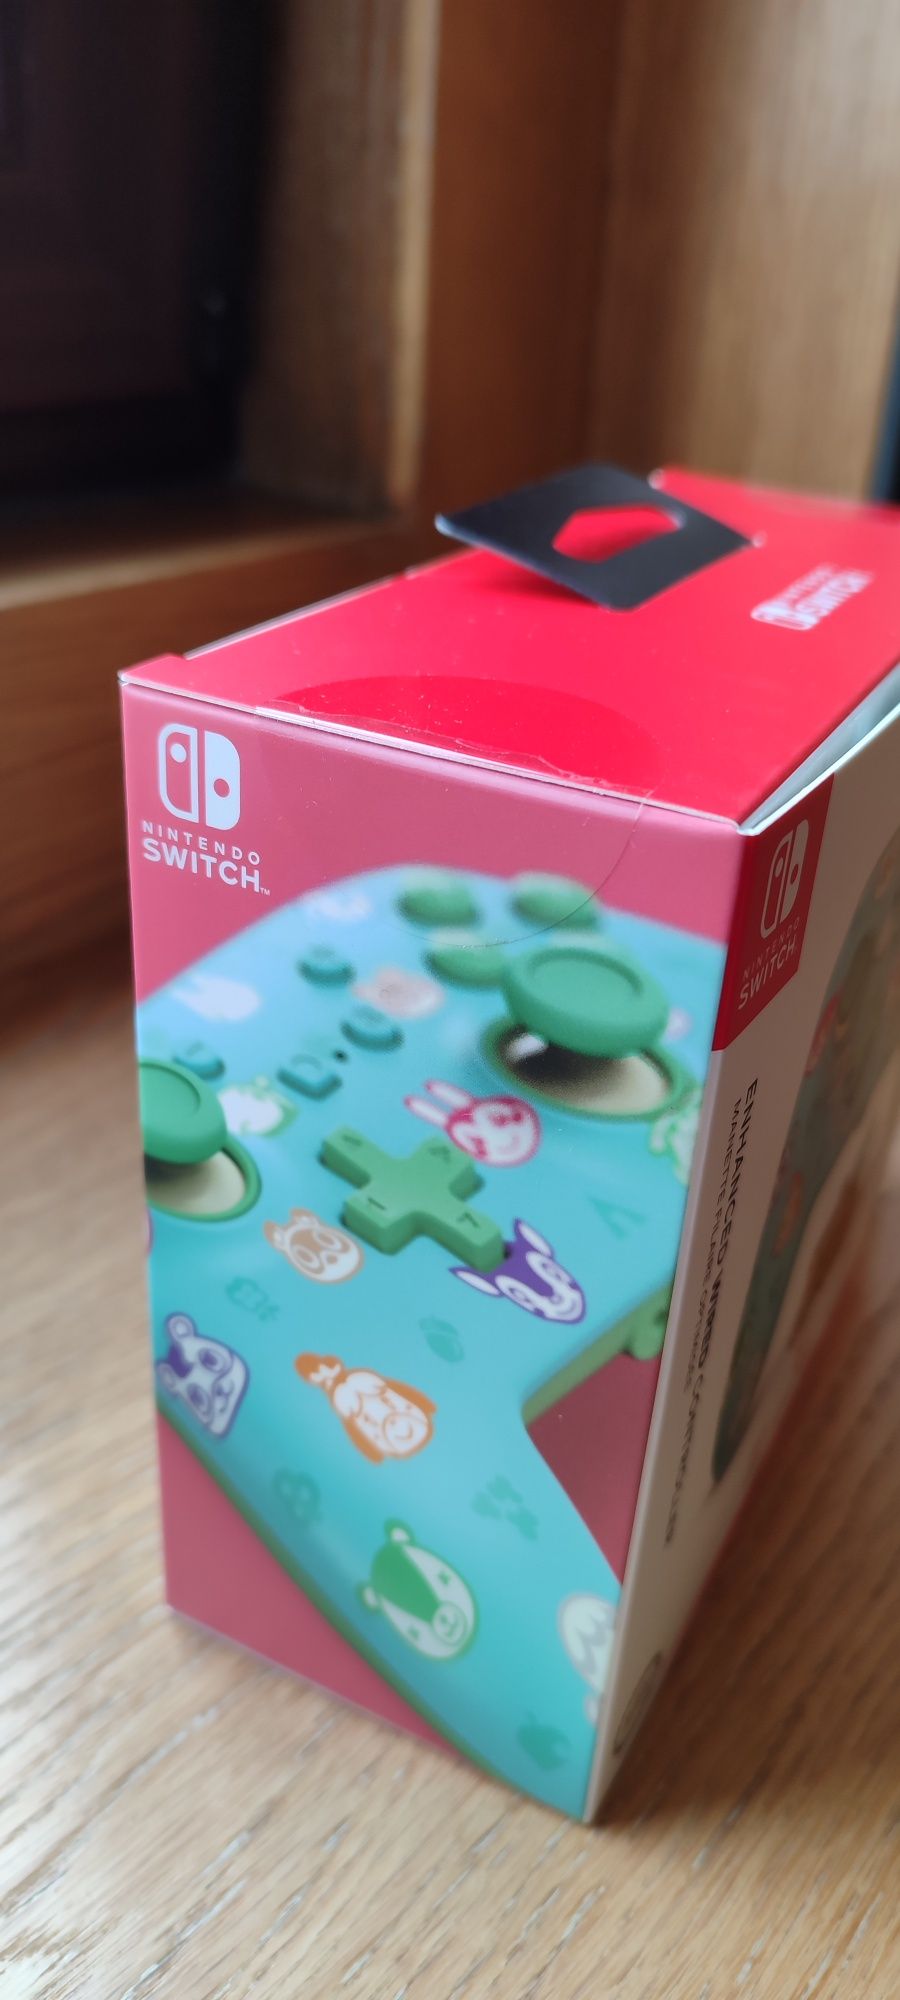 PowerA Animal Crossing New Horizons wired controller.